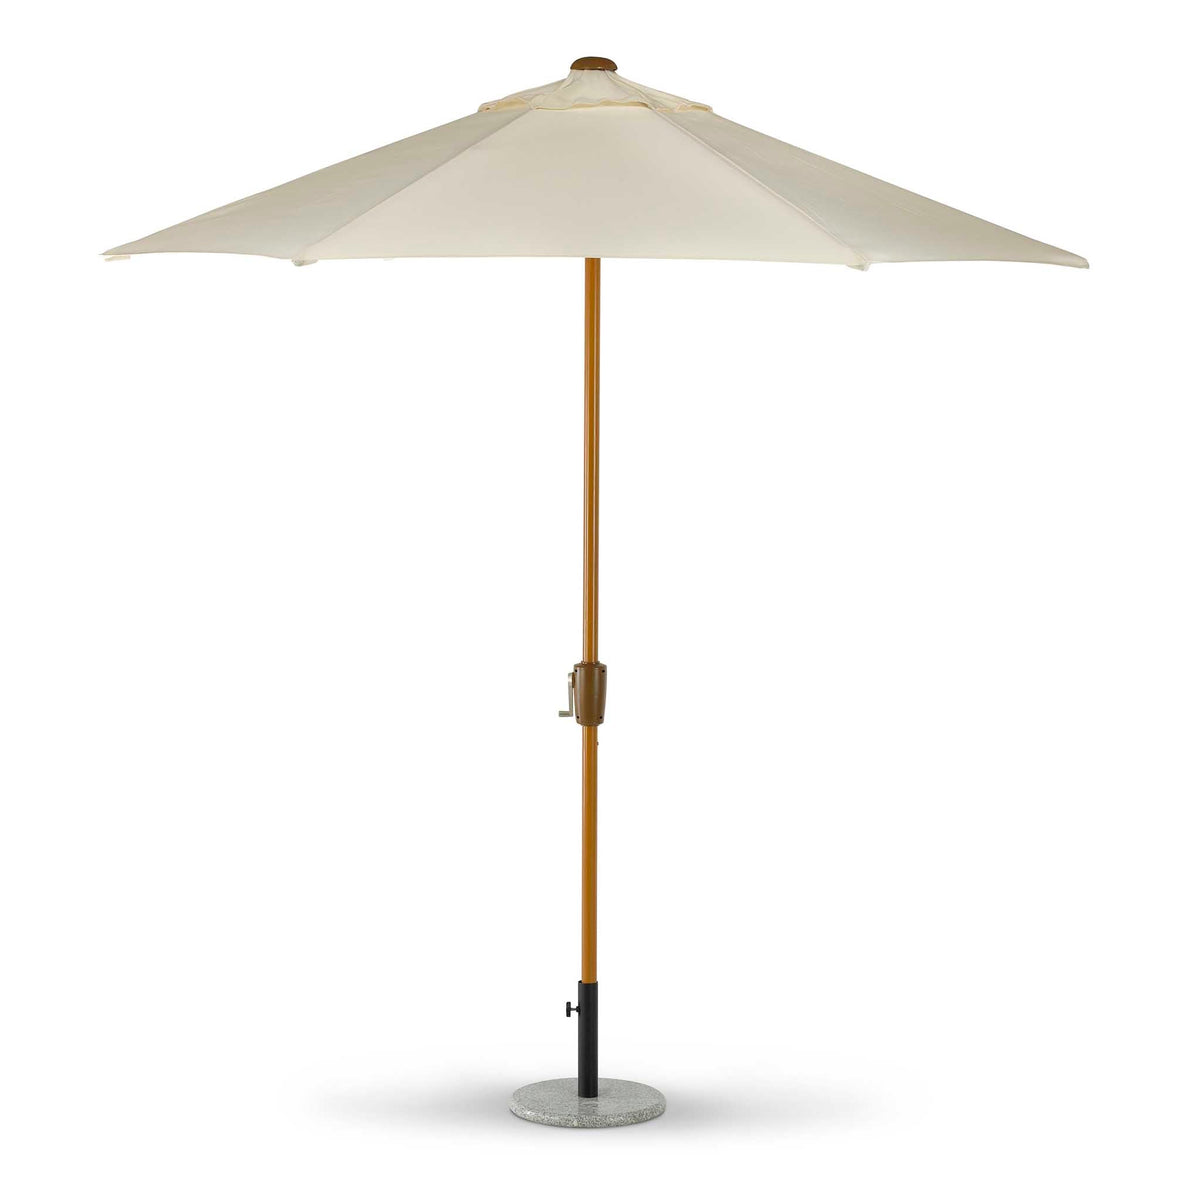 2.5m Ivory Garden Parasol with wood look aluminium frame from Roseland Furniture